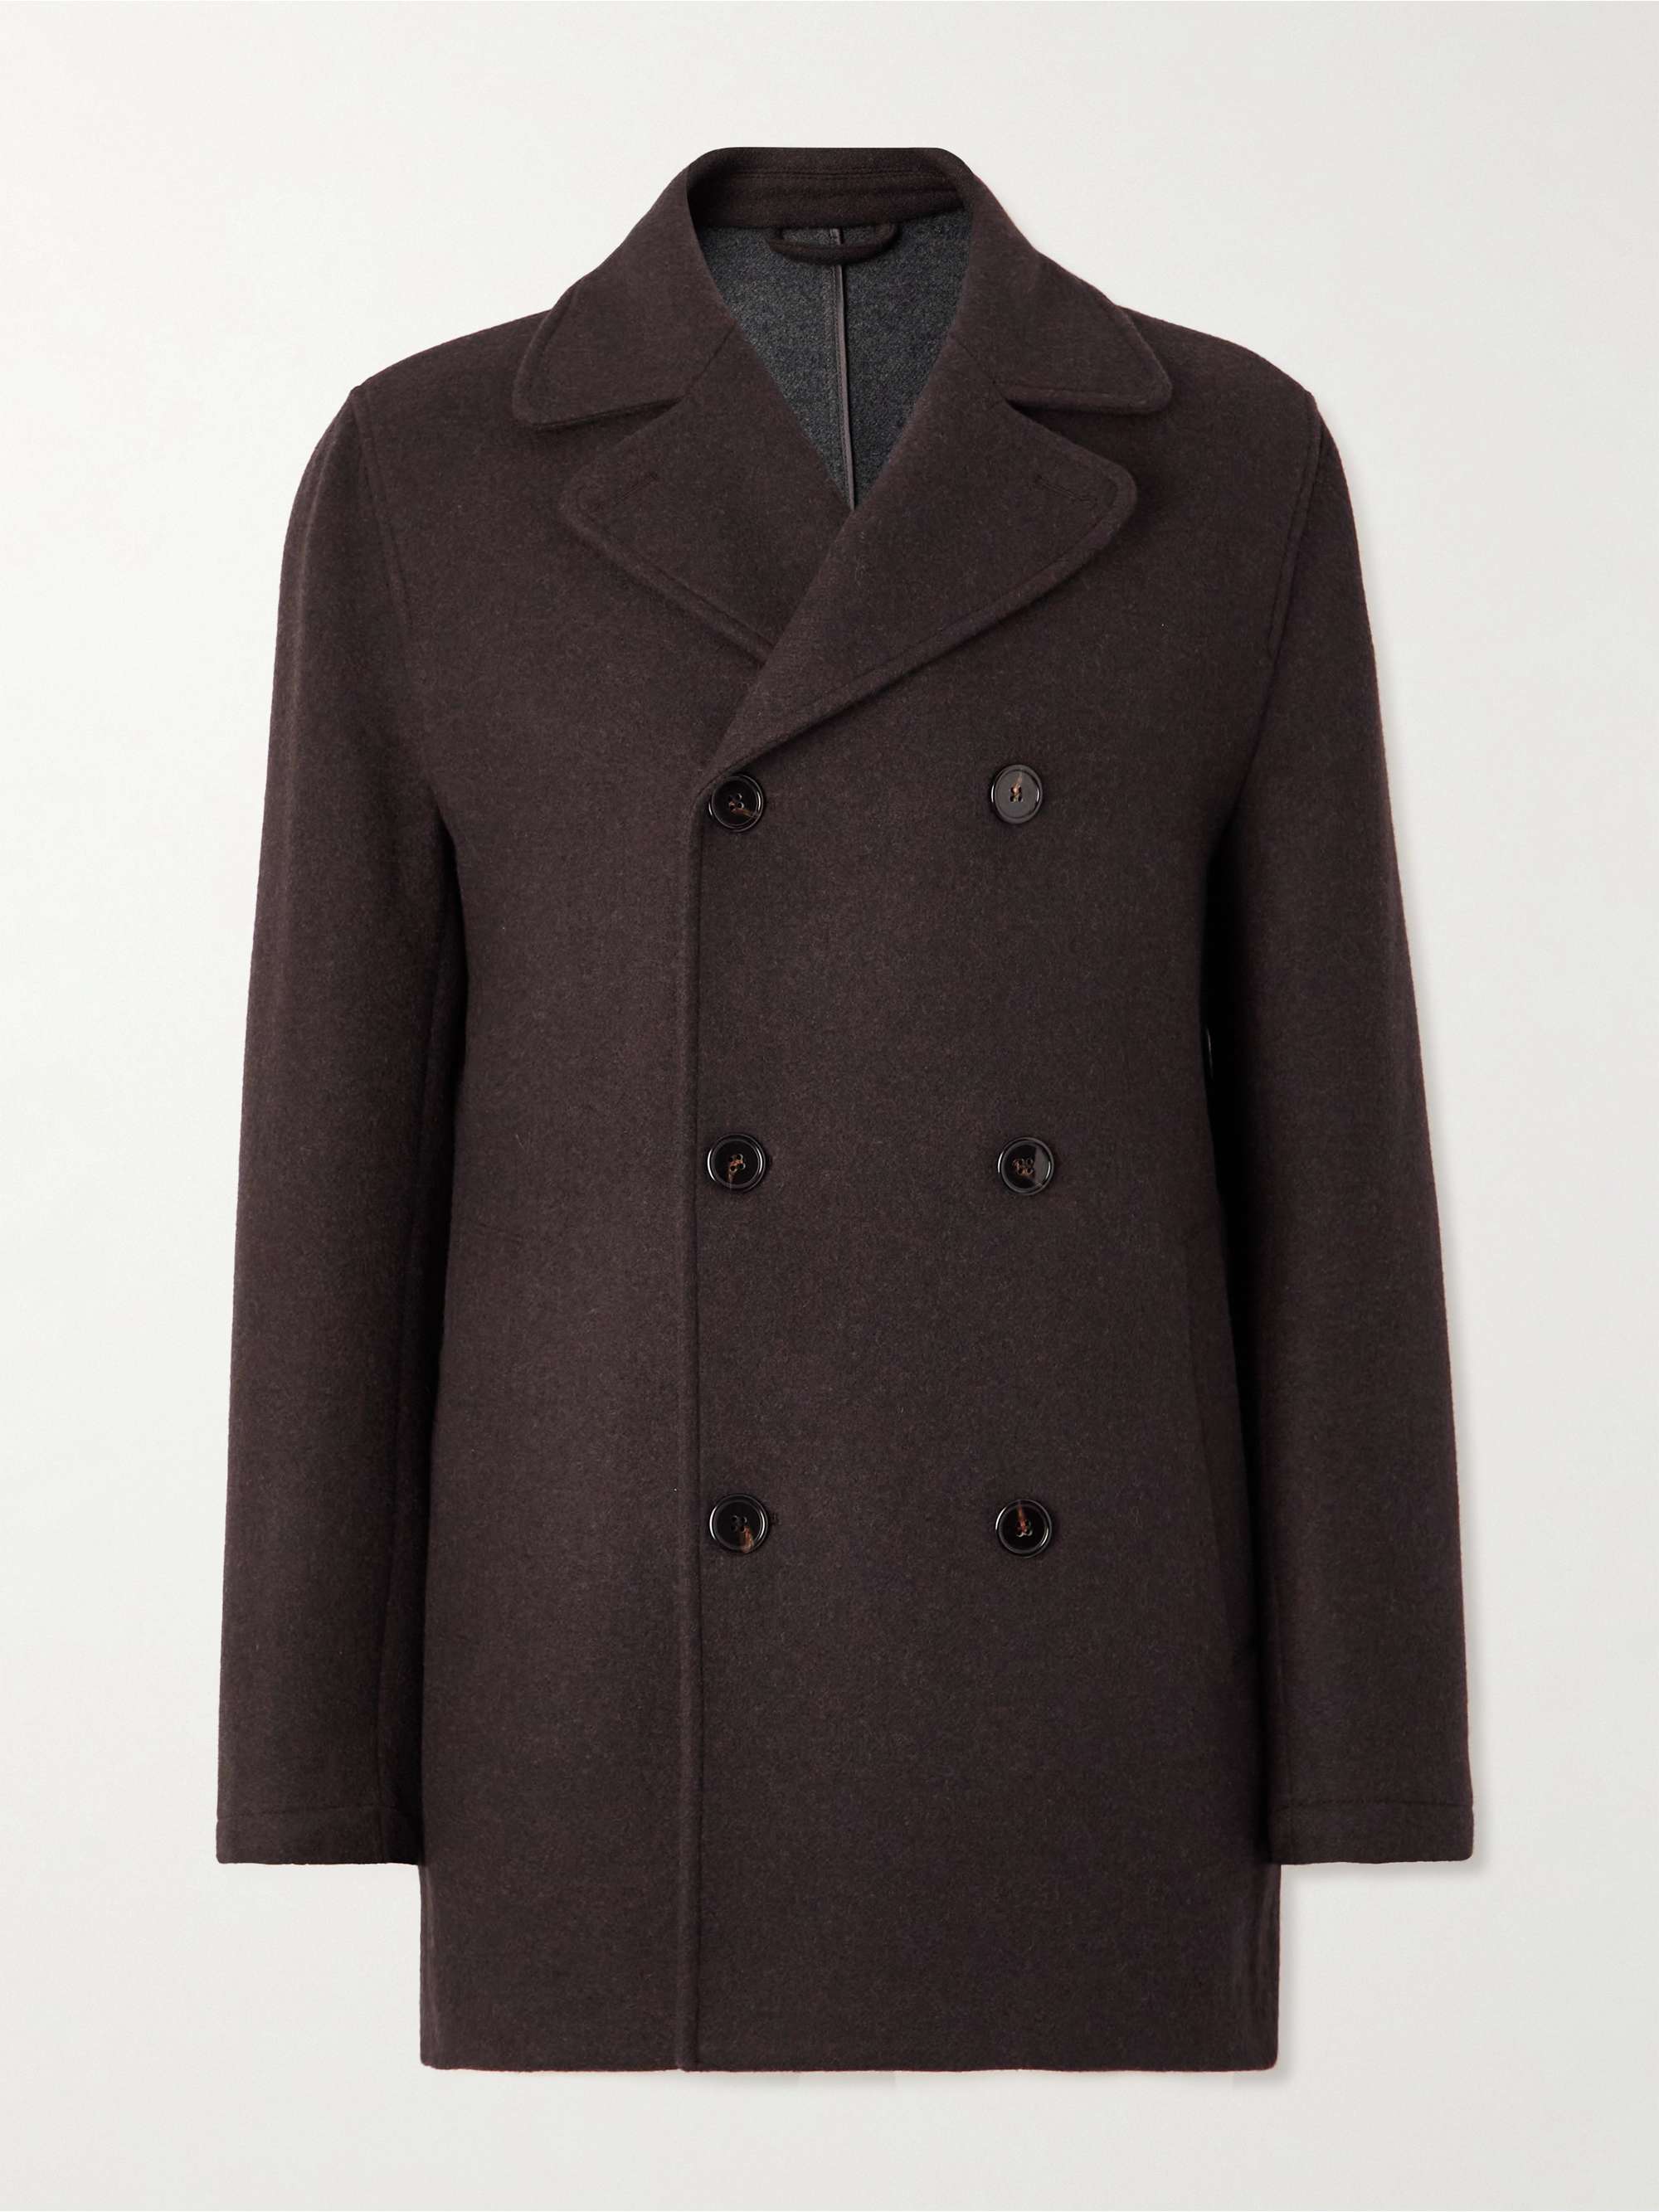 THOM SWEENEY Double-Breasted Wool Peacoat